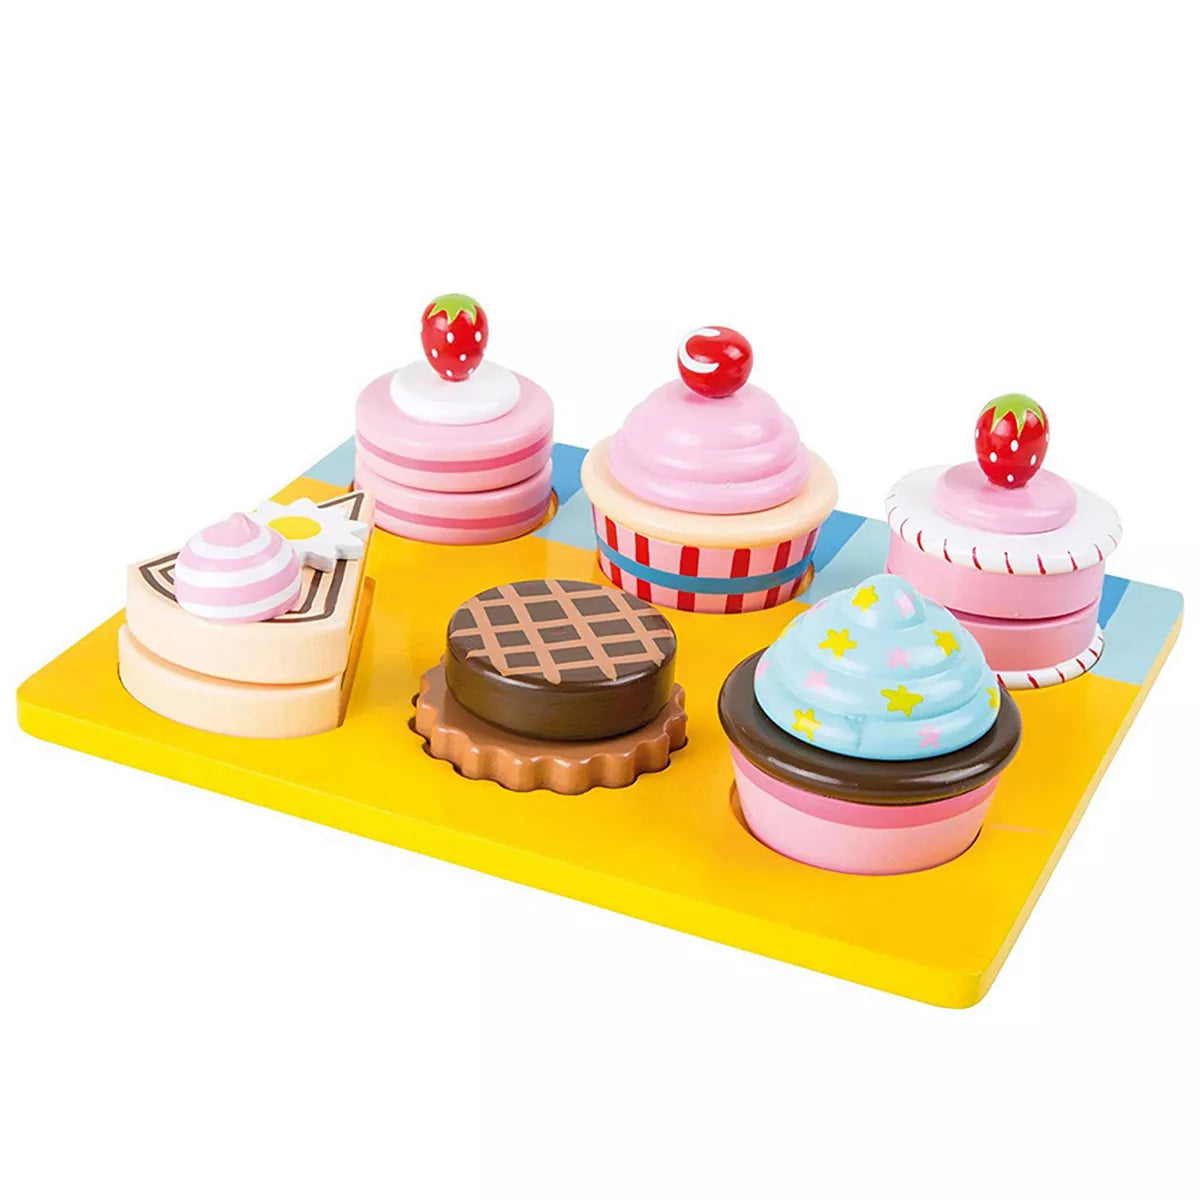 Wooden Cupcakes And Cake Cutting Set